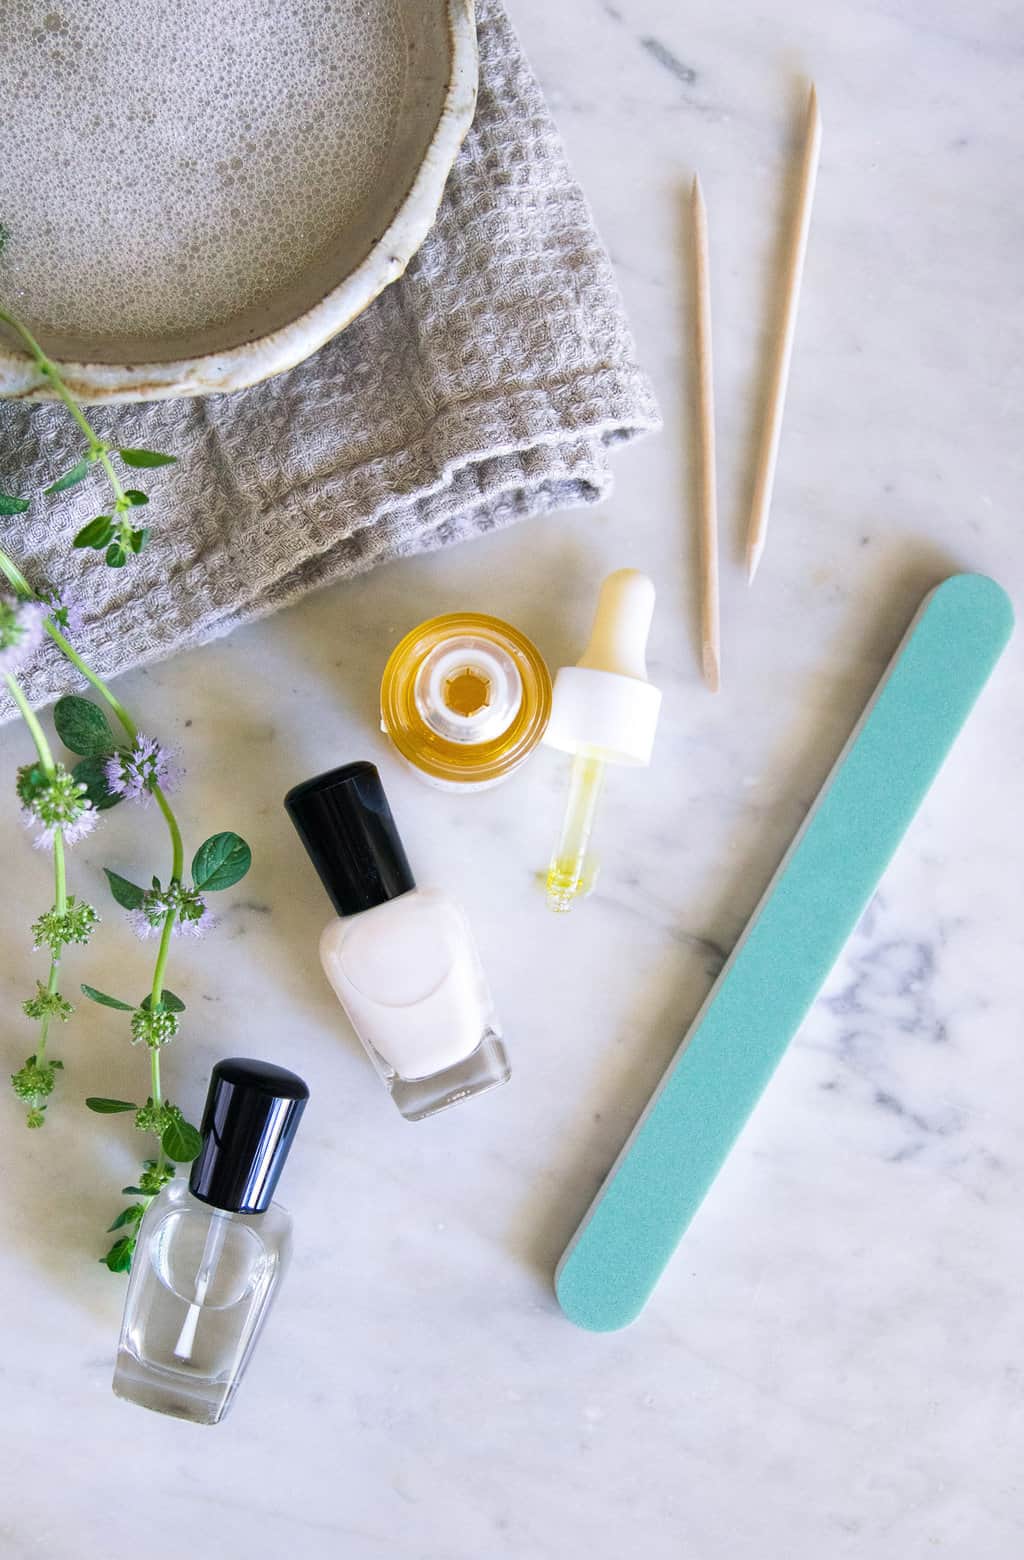 Supplies needed for at home french manicure